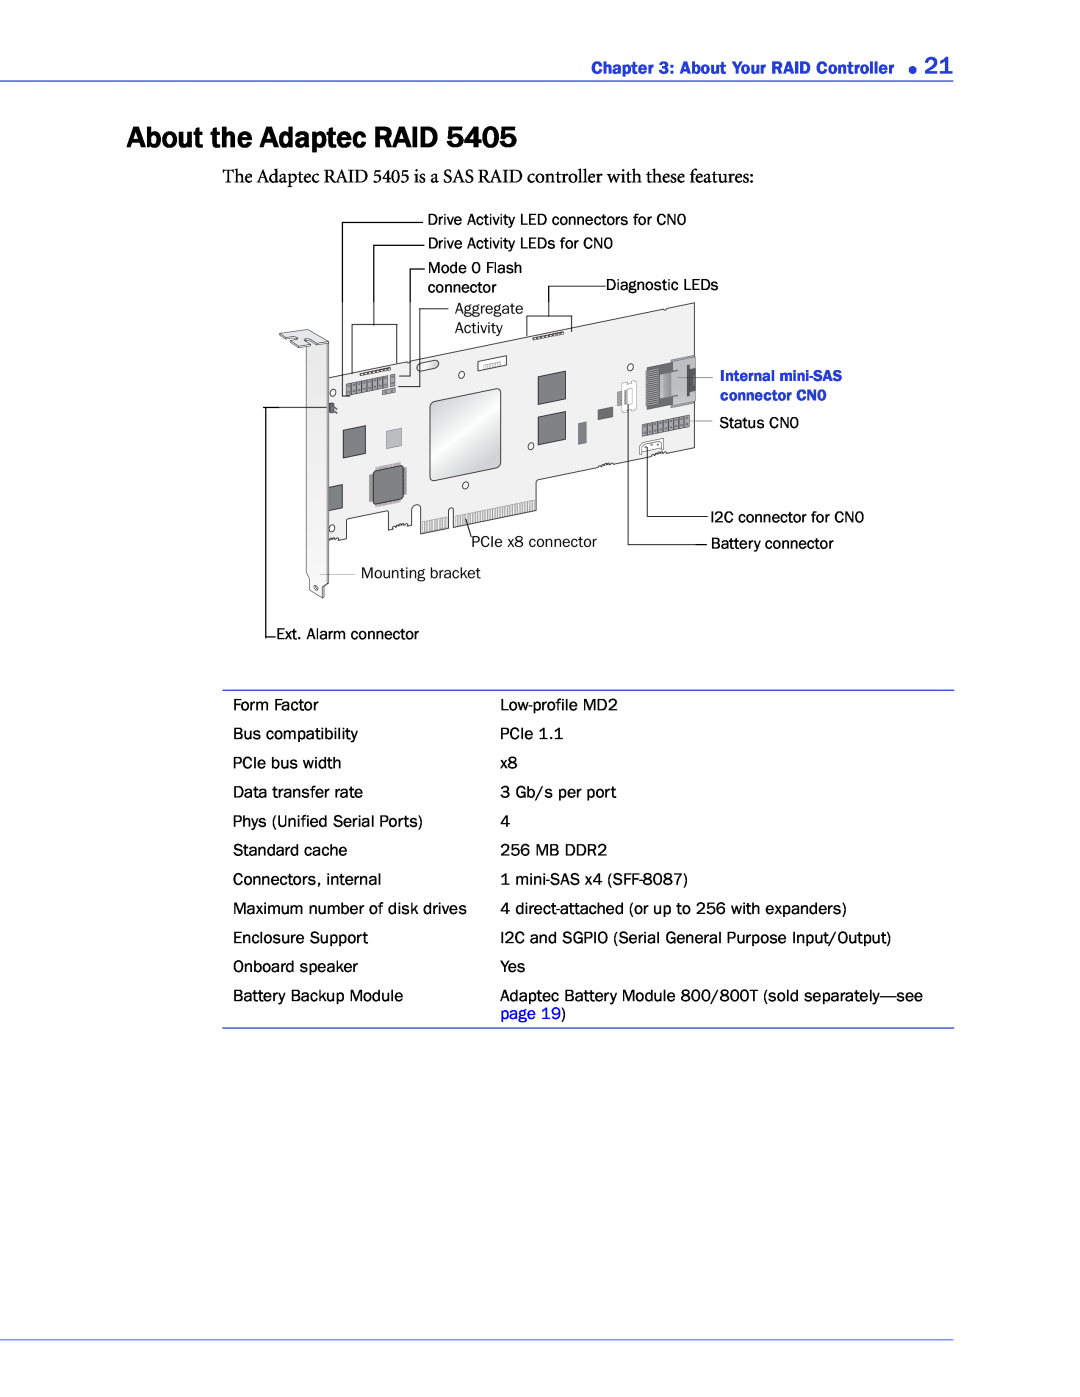 Adaptec 2268300R manual About the Adaptec RAID, The Adaptec RAID 5405 is a SAS RAID controller with these features, page 